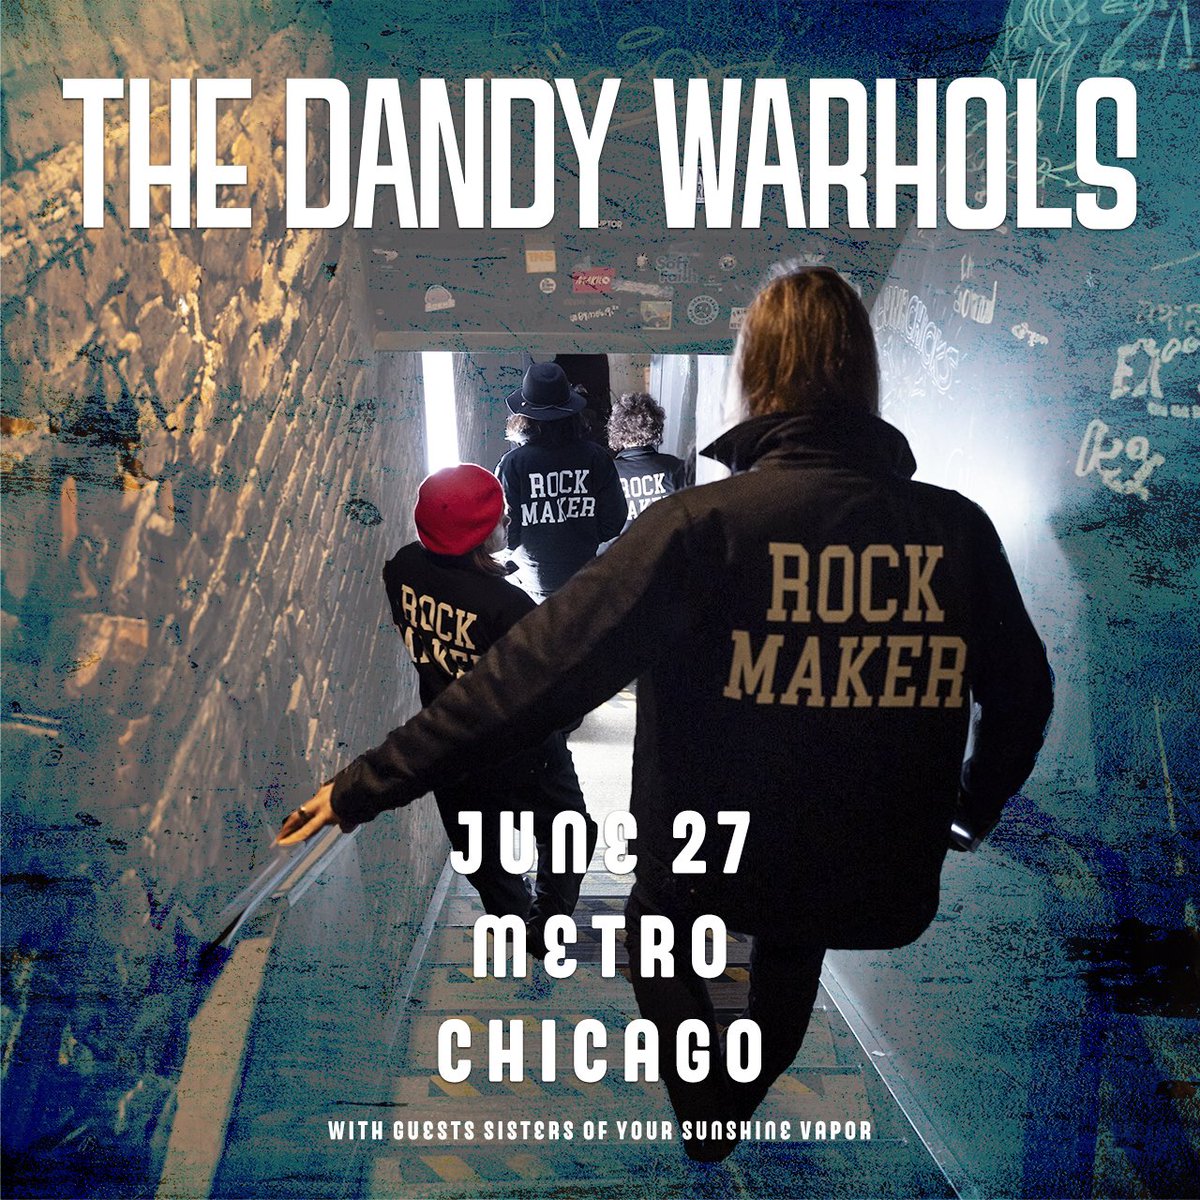 🇺🇸 The Dandy Warhols LIVE Thursday June 27th at @MetroChicago with guests @SOYSV. 🎟 bit.ly/TDW062724